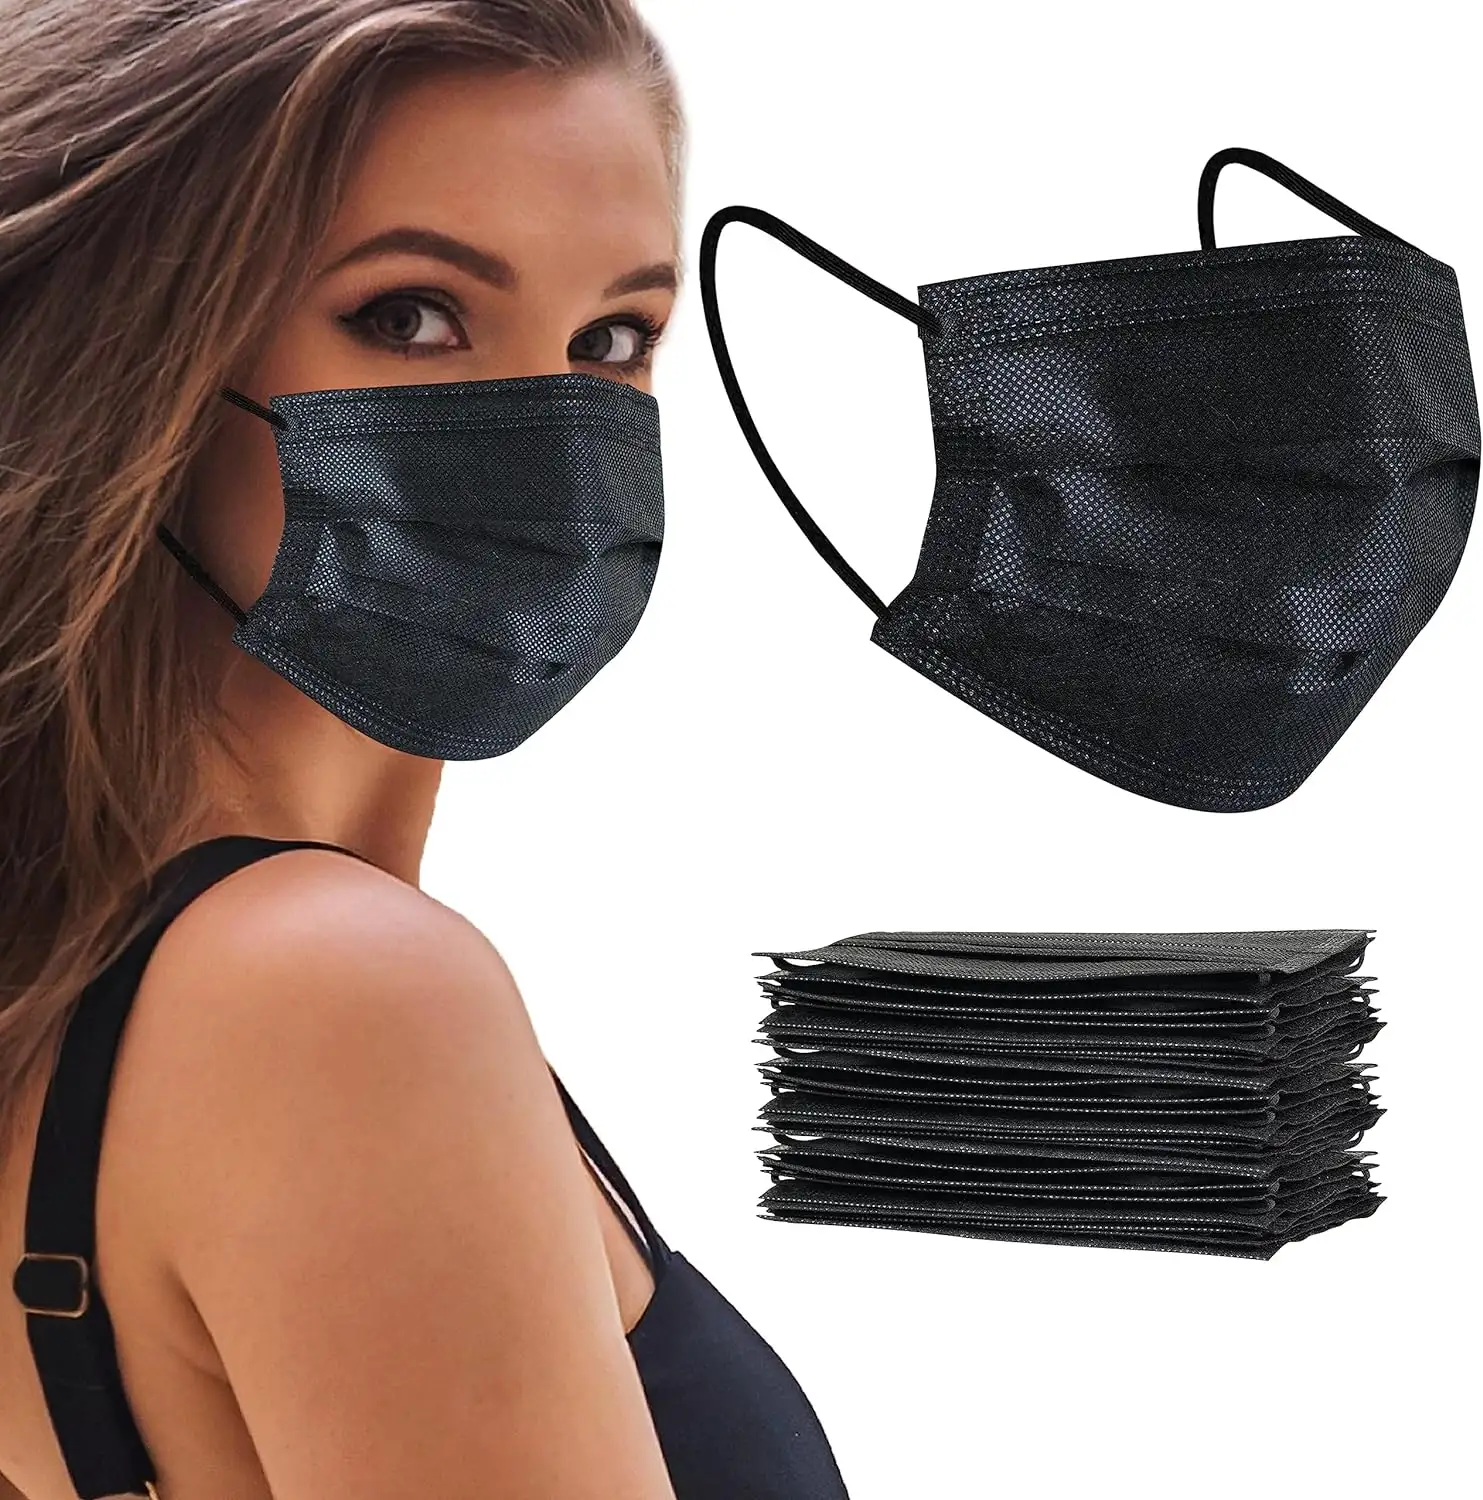 Black Comfortable Non-woven Fabric Masks 50 pcs Ear loop Surgical Masks Face Masks Disposable For Men and Women